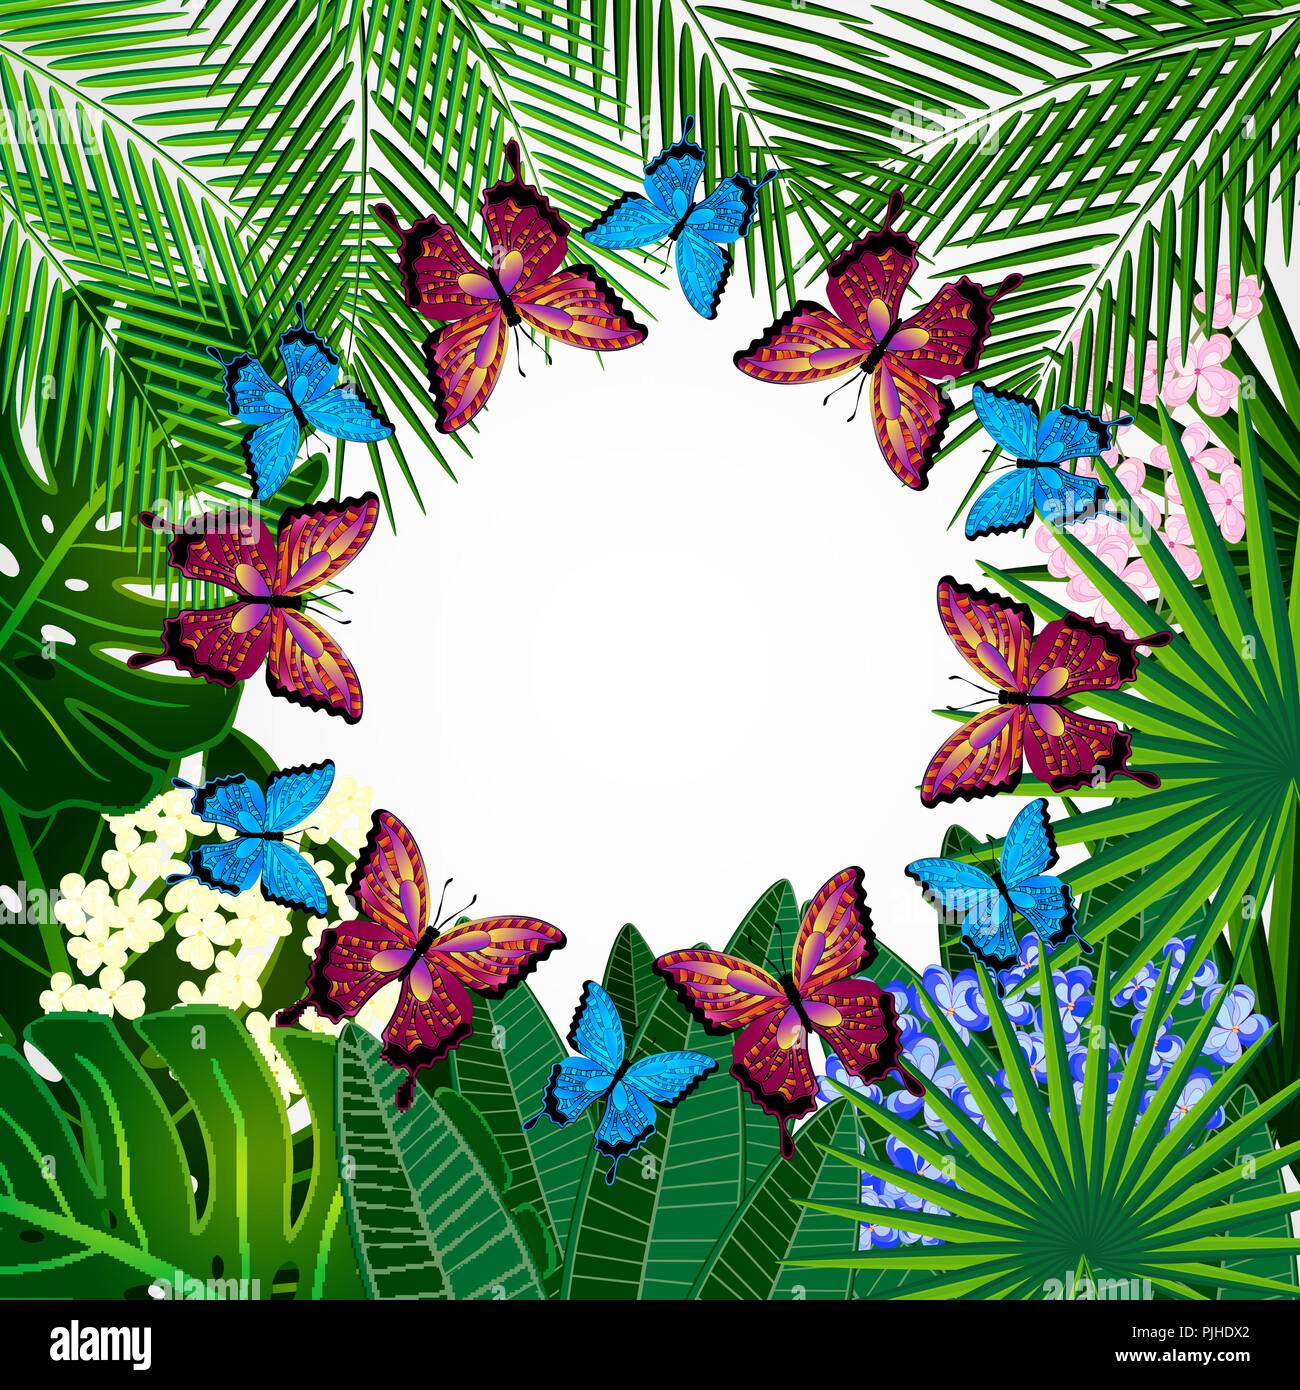 Floral design background. Tropical flowers and butterflies. Stock Vector